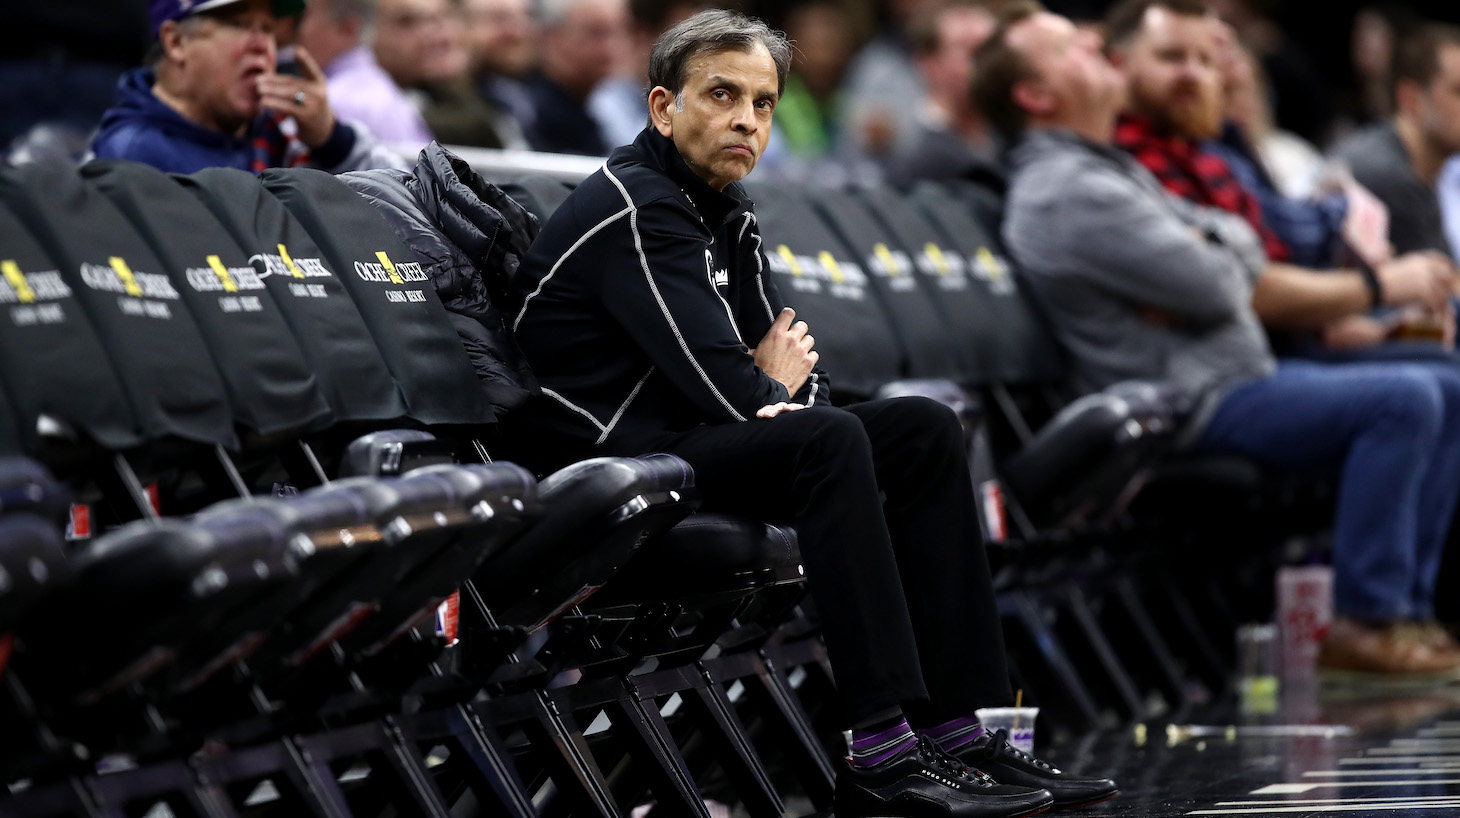 SACRAMENTO, CALIFORNIA - JANUARY 15: Sacramento Kings owner Vivek Ranadivé sits court side at the start of the second half of their game against the Dallas Mavericks at Golden 1 Center on January 15, 2020 in Sacramento, California. NOTE TO USER: User expressly acknowledges and agrees that, by downloading and or using this photograph, User is consenting to the terms and conditions of the Getty Images License Agreement. (Photo by Ezra Shaw/Getty Images)